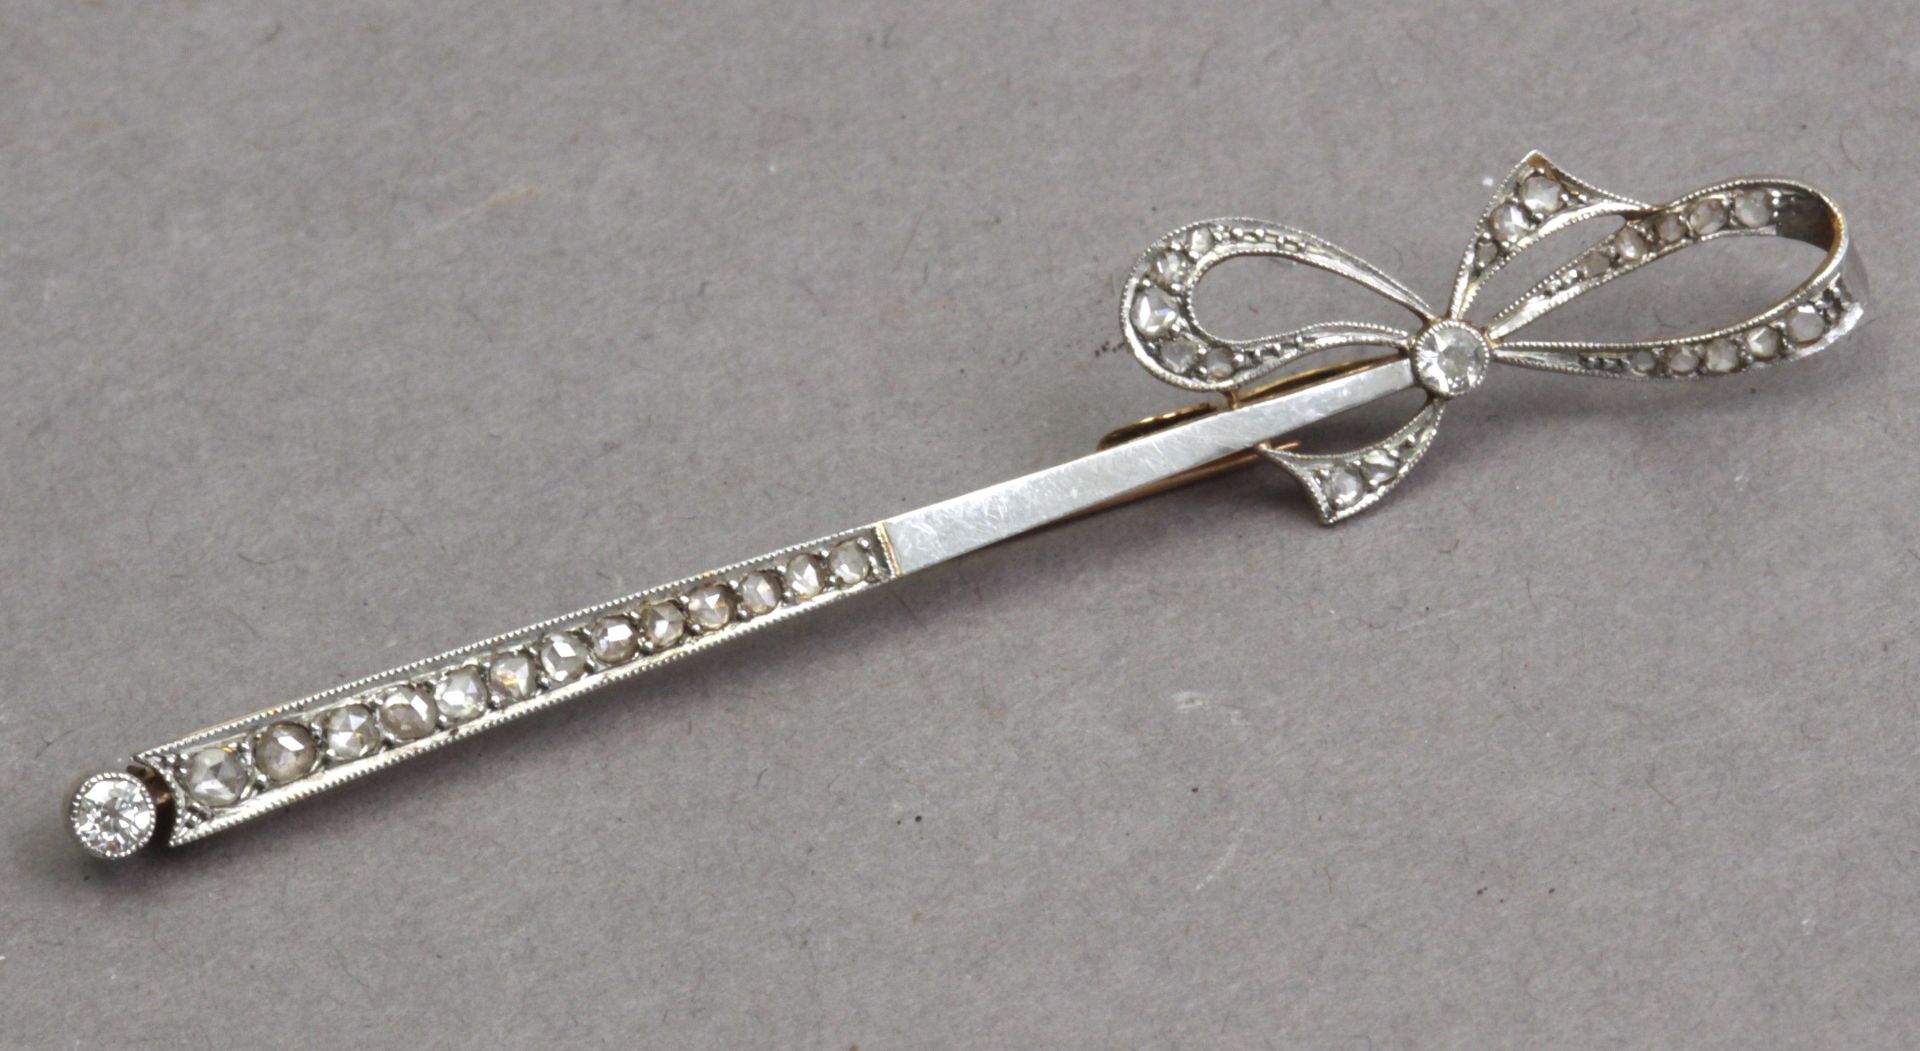 An early 20th century Belle Époque diamond tie pin with an 18 k. yellow gold and platinum setting - Image 2 of 4